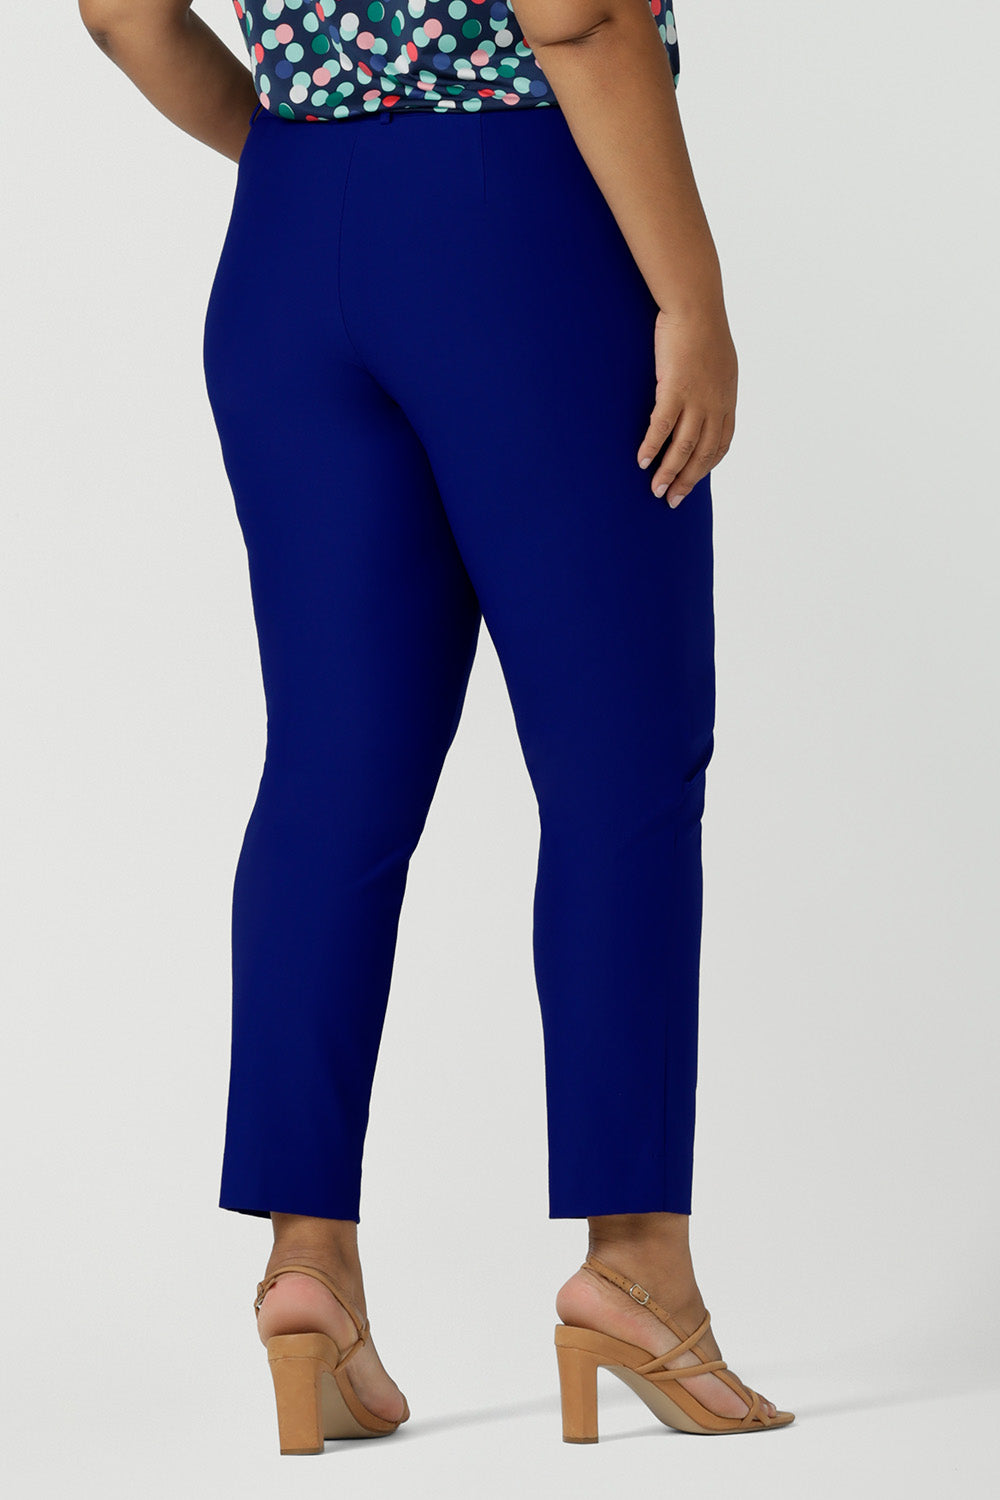 Back view of cobalt blue tailored pants shown on a size 18, curvy woman. Great pants for plus size women, wear these stretch-fit tapered leg trousers for work or as smart-casual pants for the weekend. Made in Australia, these women's trousers are available to shop in sizes 8 to 24.